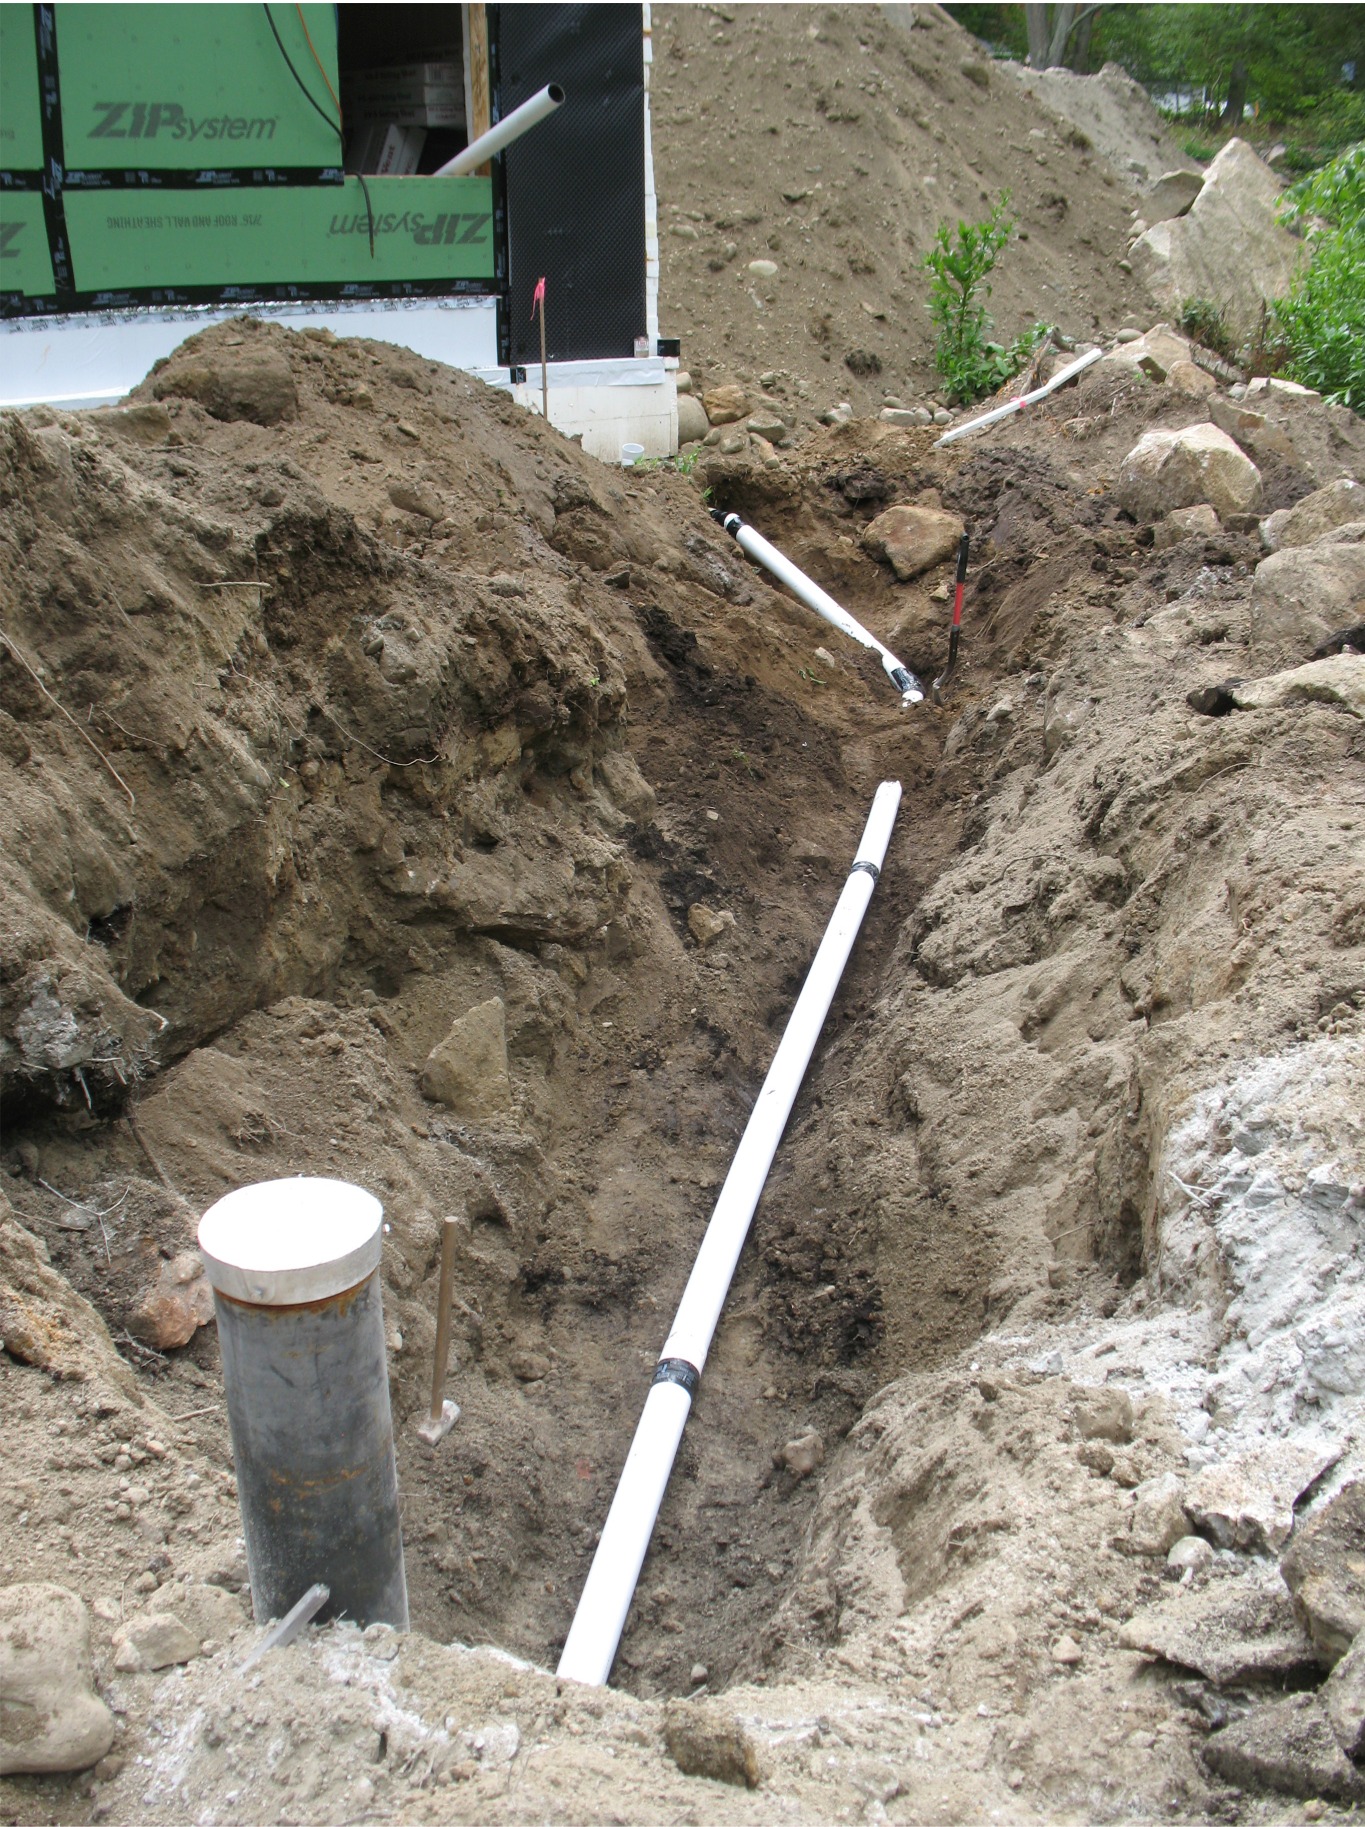 What Type of Pipe Is Used for Underground Water Lines?